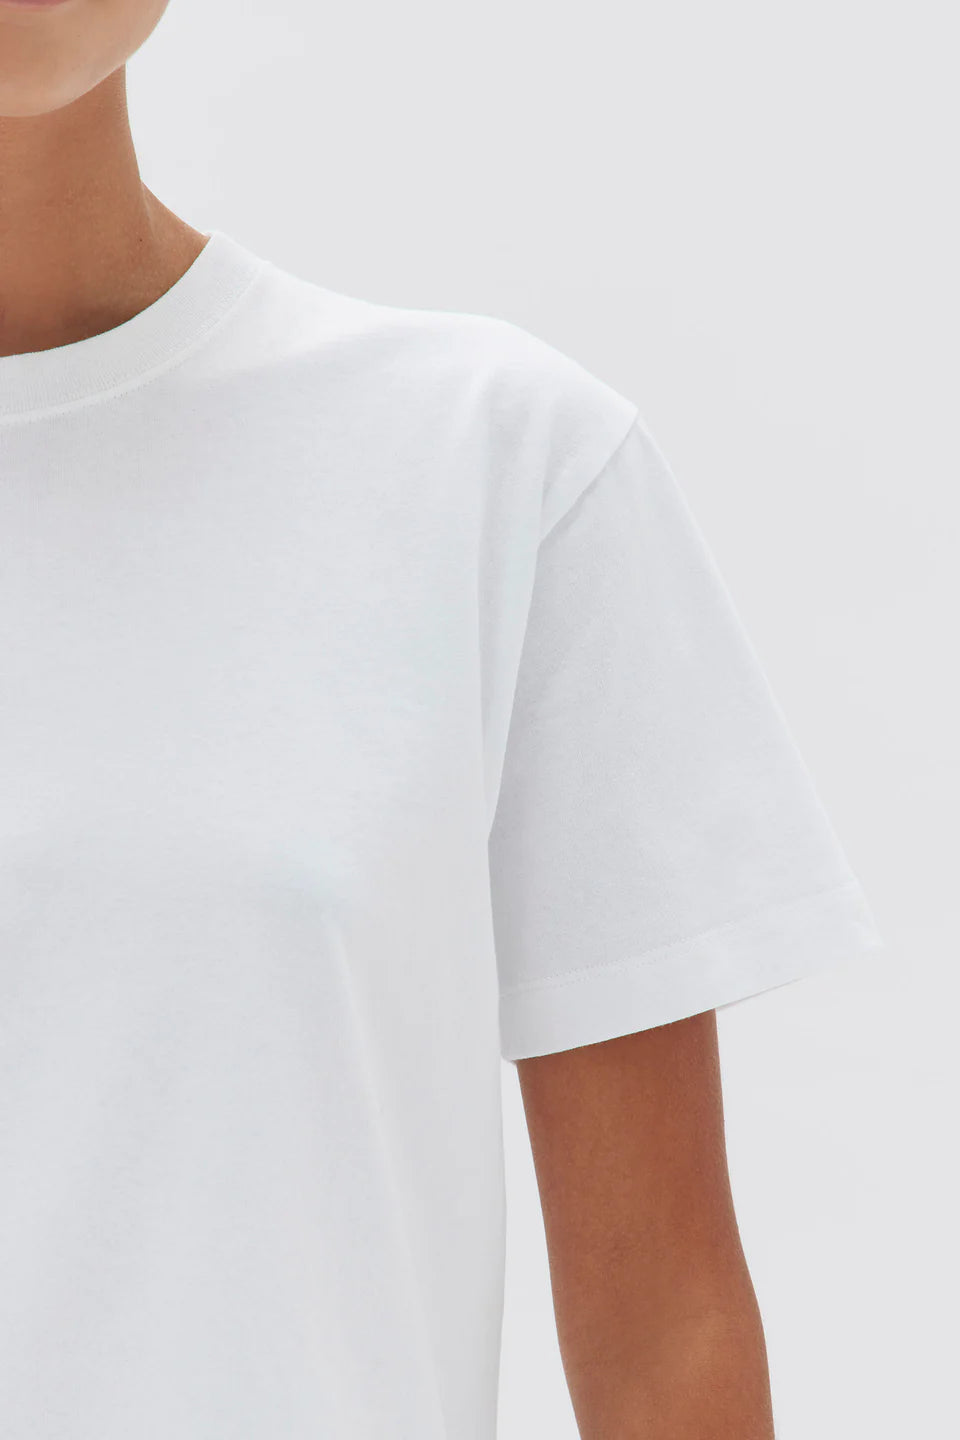 ASSEMBLY LABEL - Organic Base Tee - White